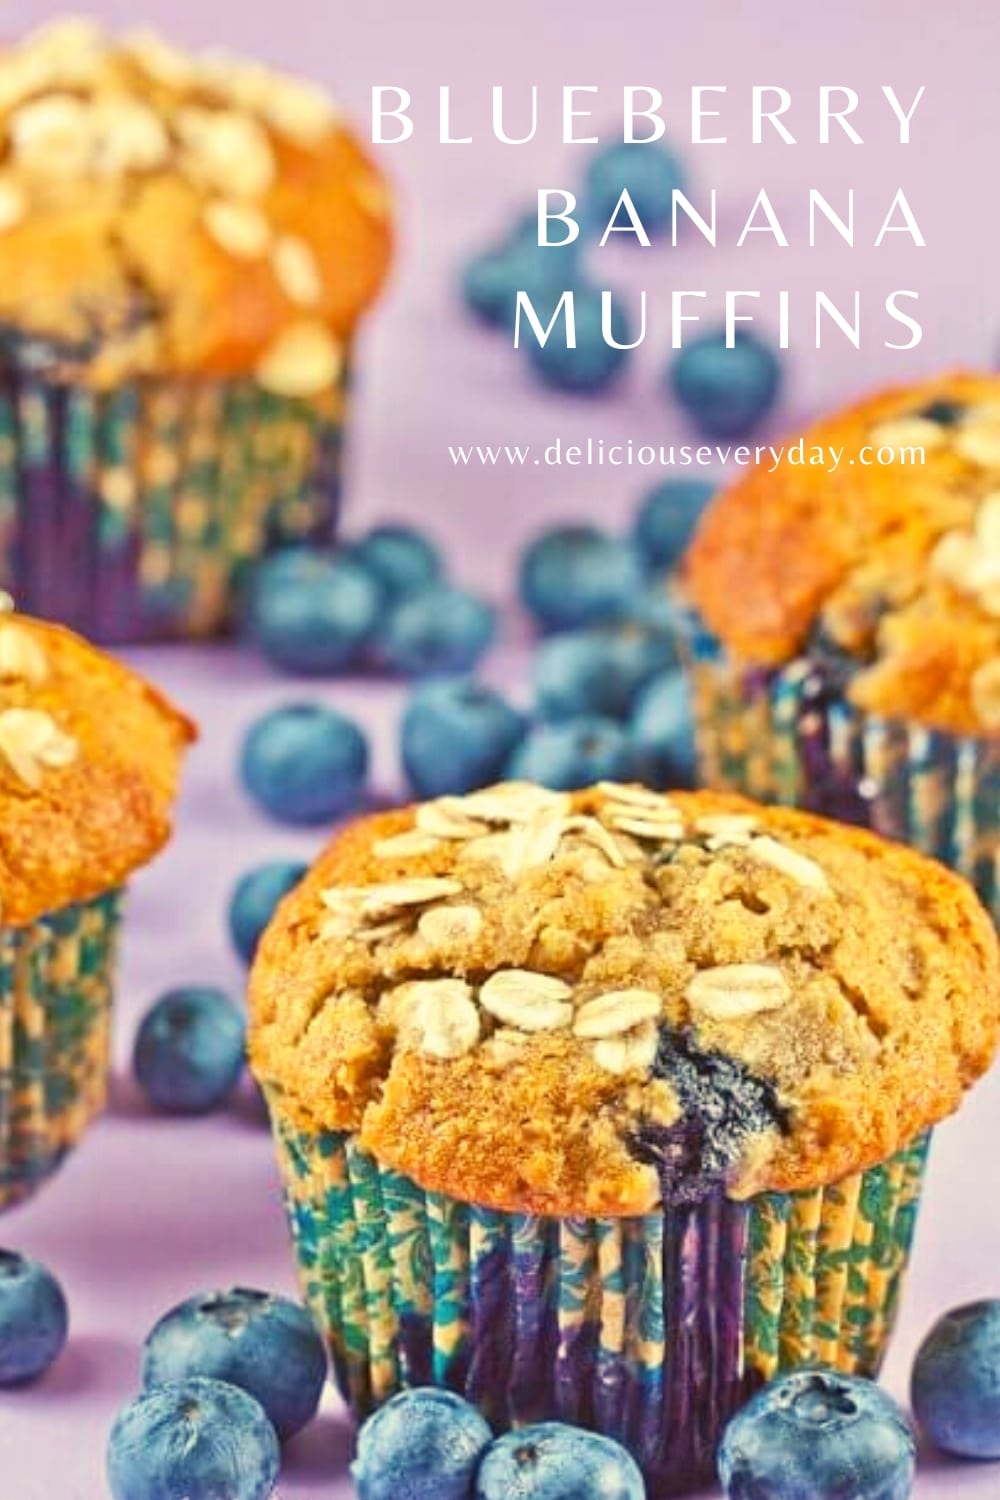 Blueberry Banana Muffins | Sugar Free | Delicious Everyday